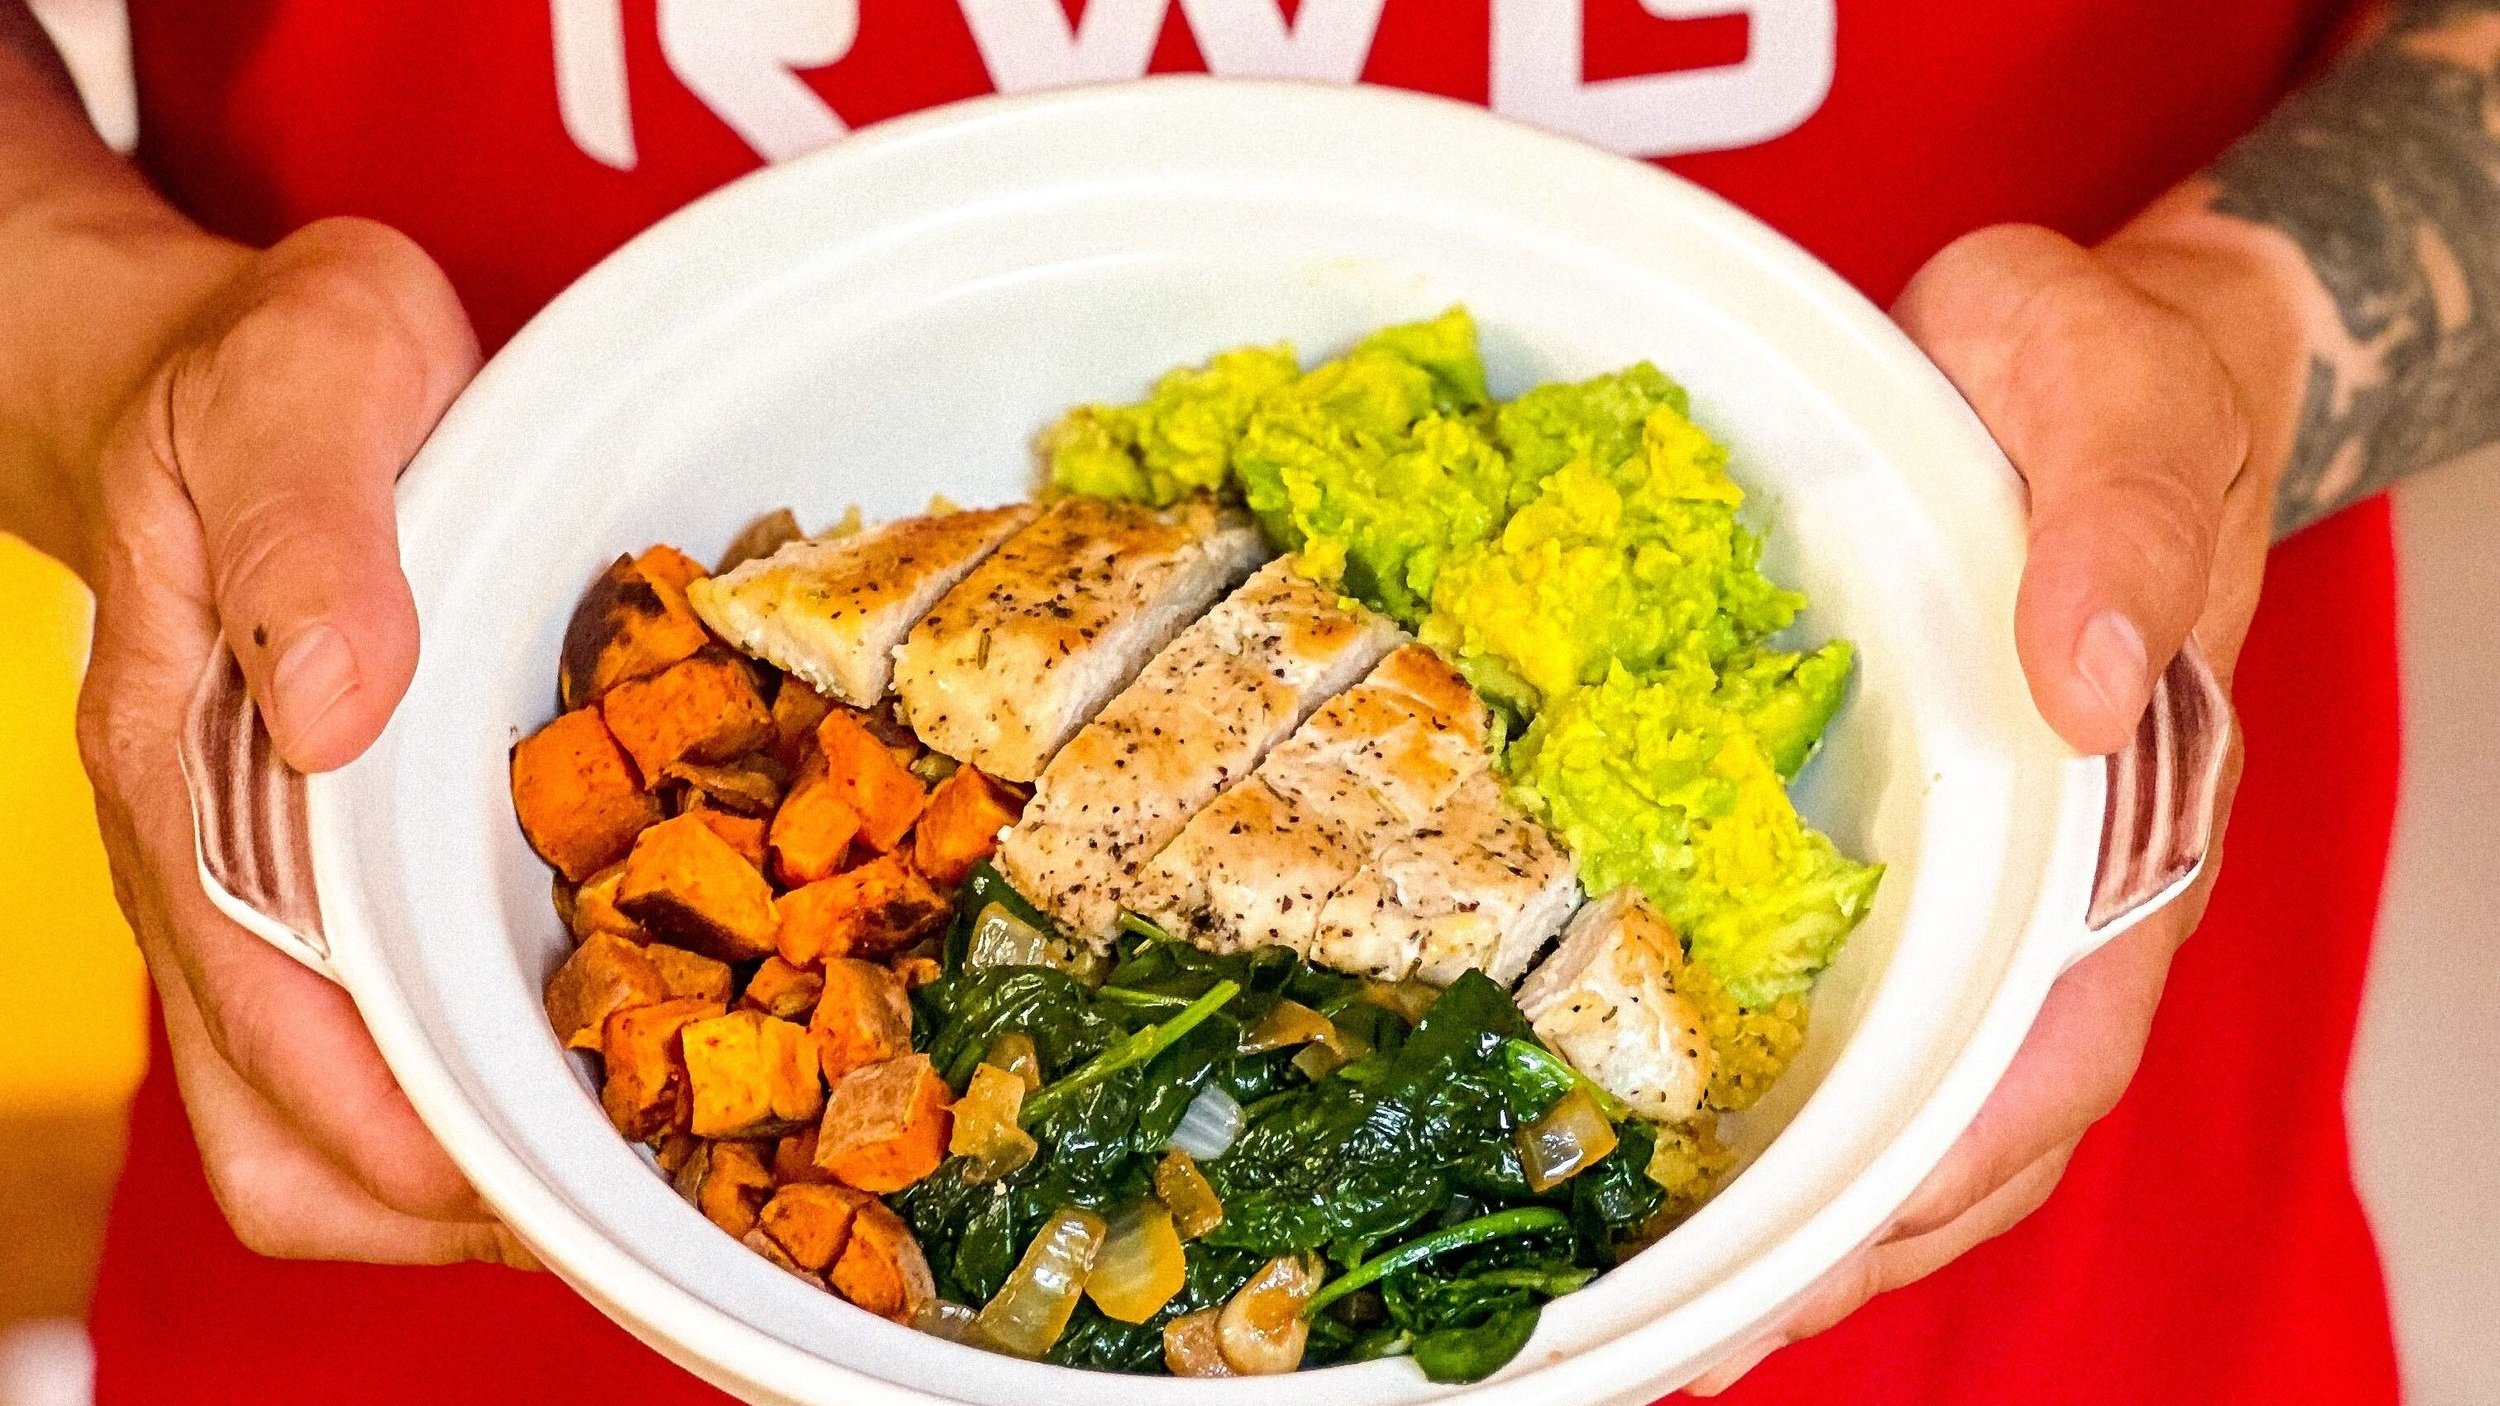 Recipe: Chicken Quinoa Bowls with Sweet Potatoes and Spinach